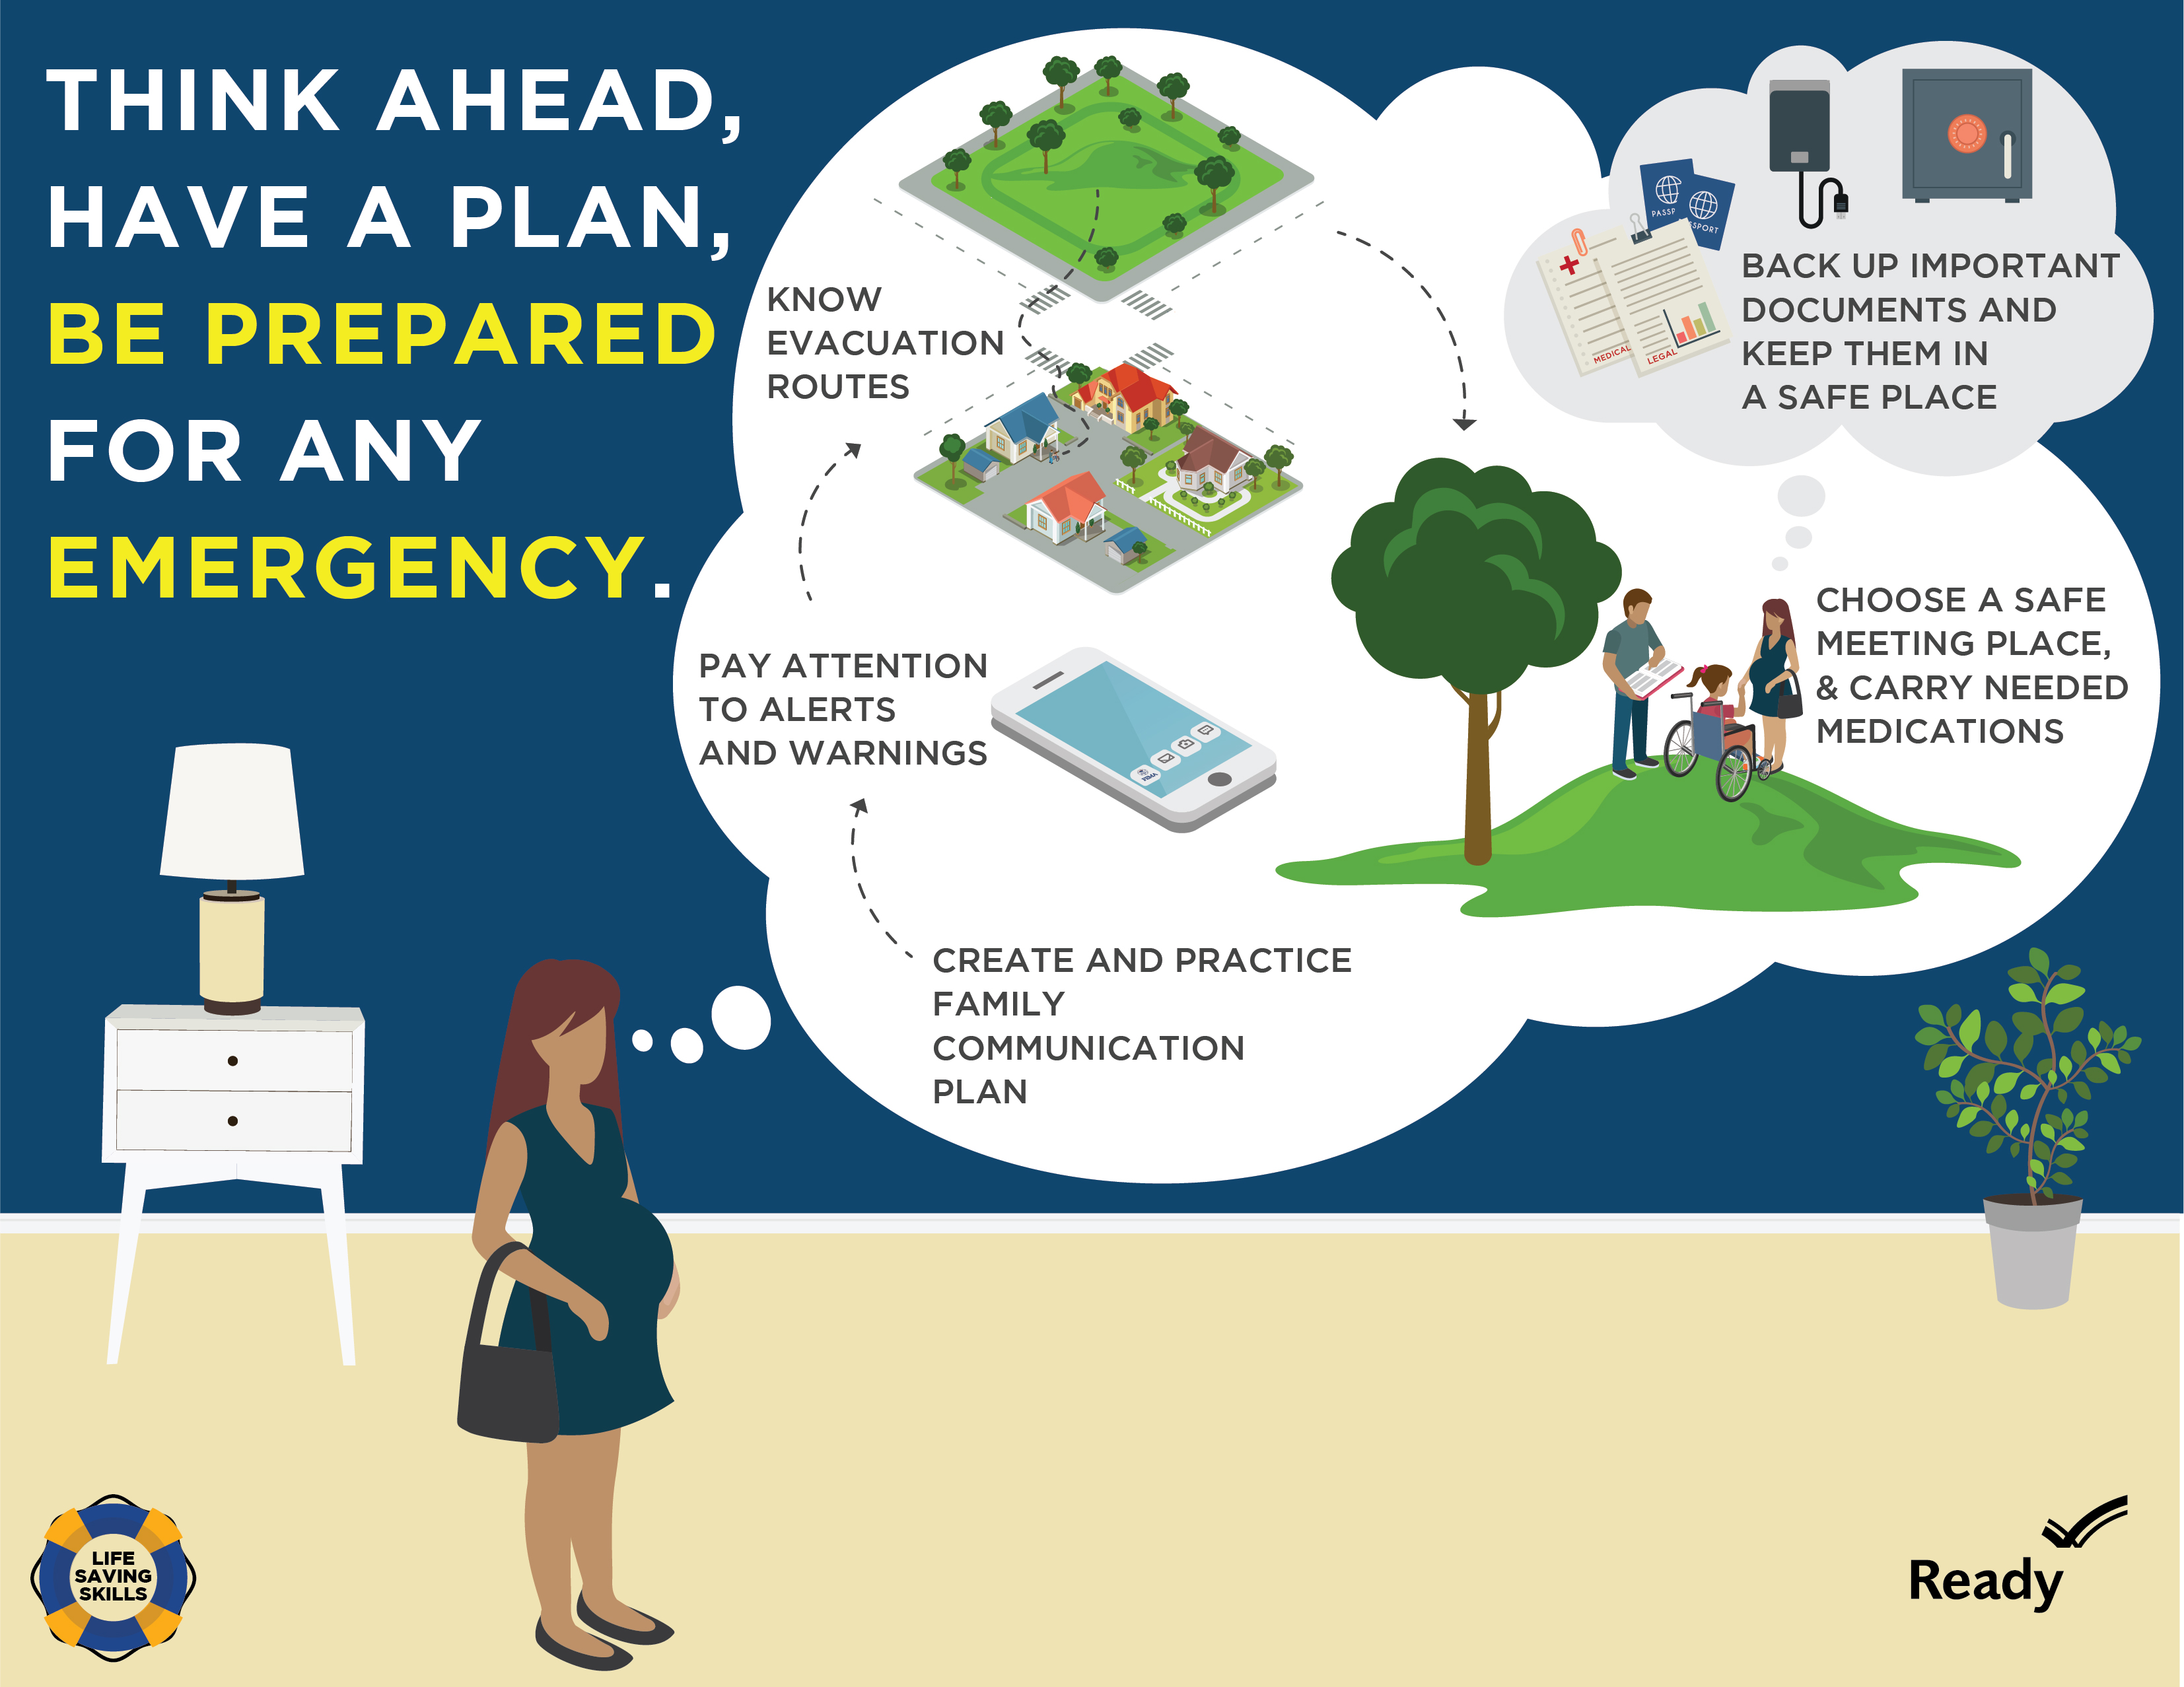 Think ahead, have a plan, be prepared for any emergency.